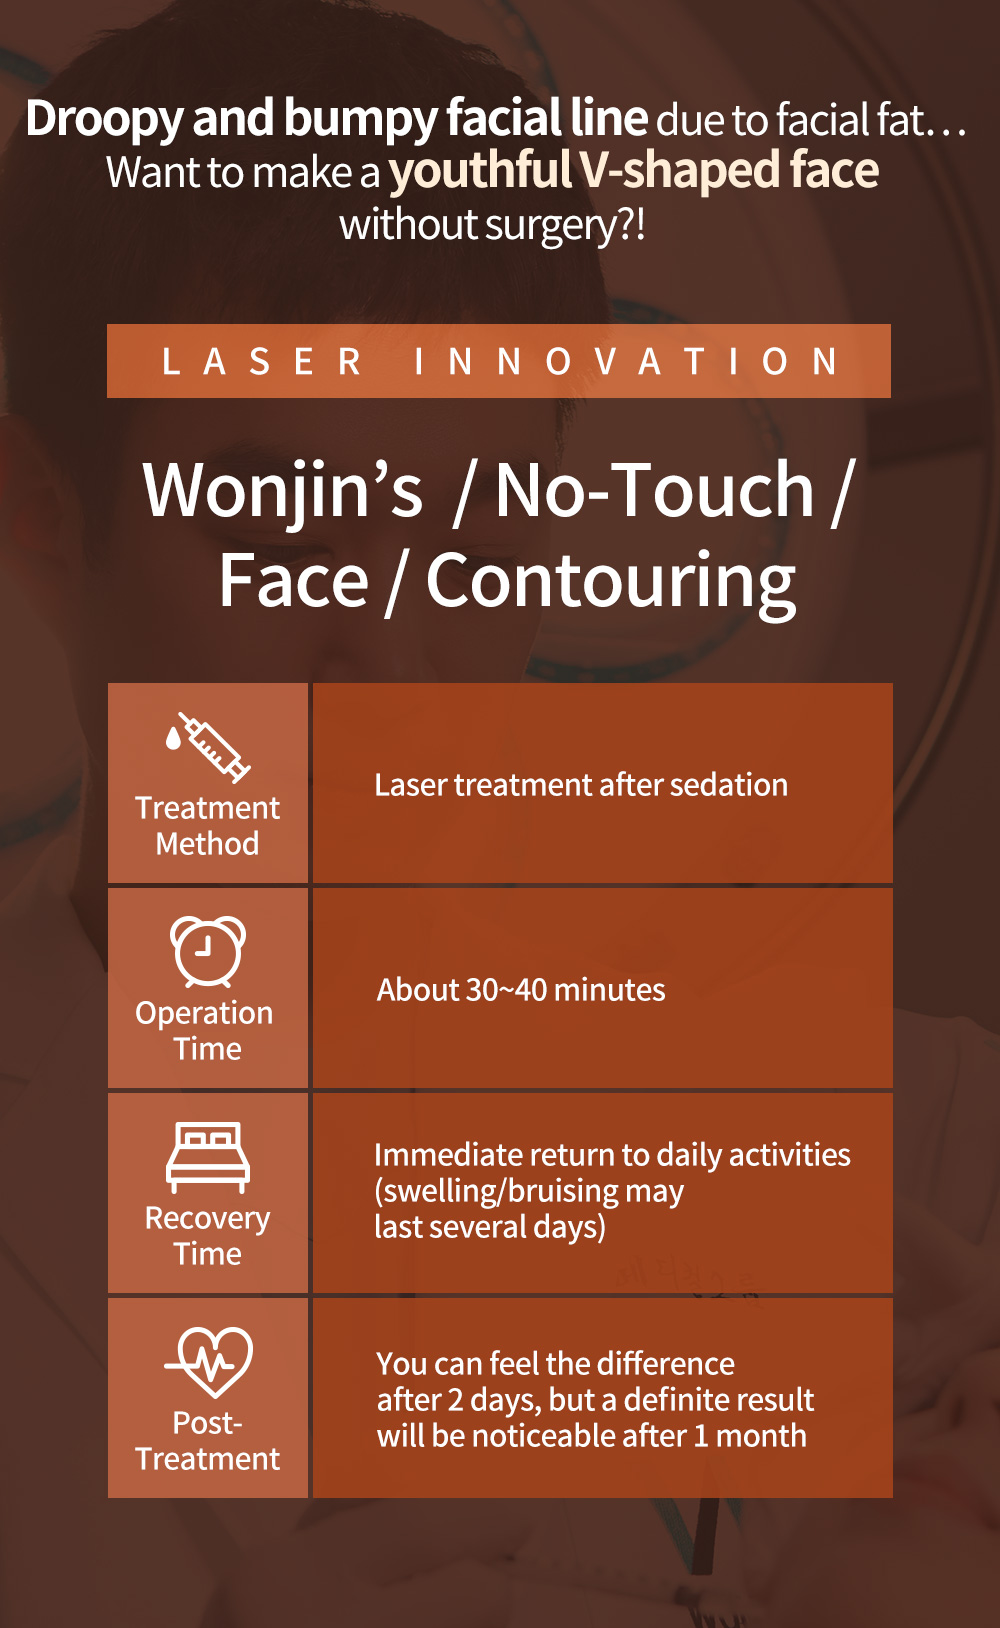 Droopy and bumpy facial line due to facial fat… Want to make a youthful V-shaped face without surgery?! L A S E R   I N N O V A T I O N , Wonjin’s  / No-Touch / Face / Contouring, Treatment Method - Laser treatment after sedation, Operation Time - Operation Time, Recovery Time- Immediate return to daily activities (swelling/bruising may last several days) , Post-Treatment - You can feel the difference after 2 days, but a definite result will be noticeable after 1 month